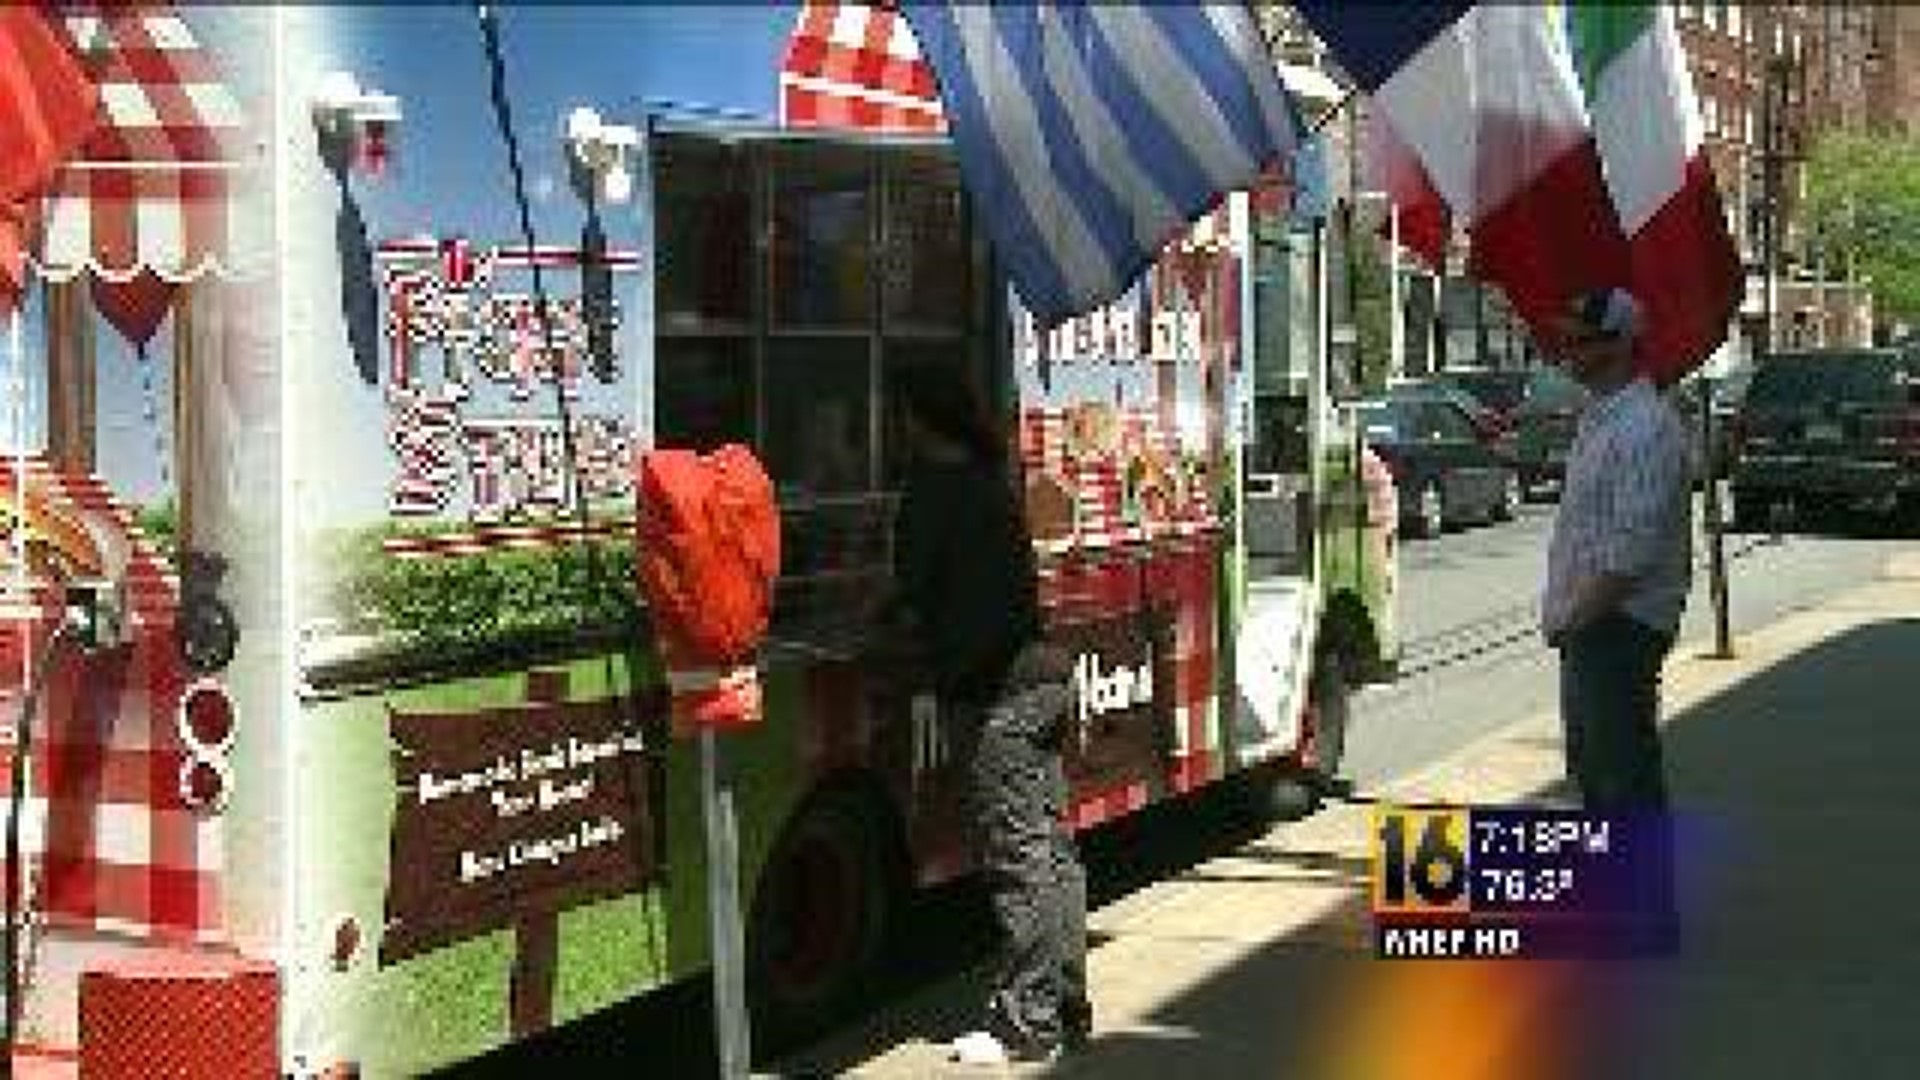 Thousands Polled About Scranton Food Trucks